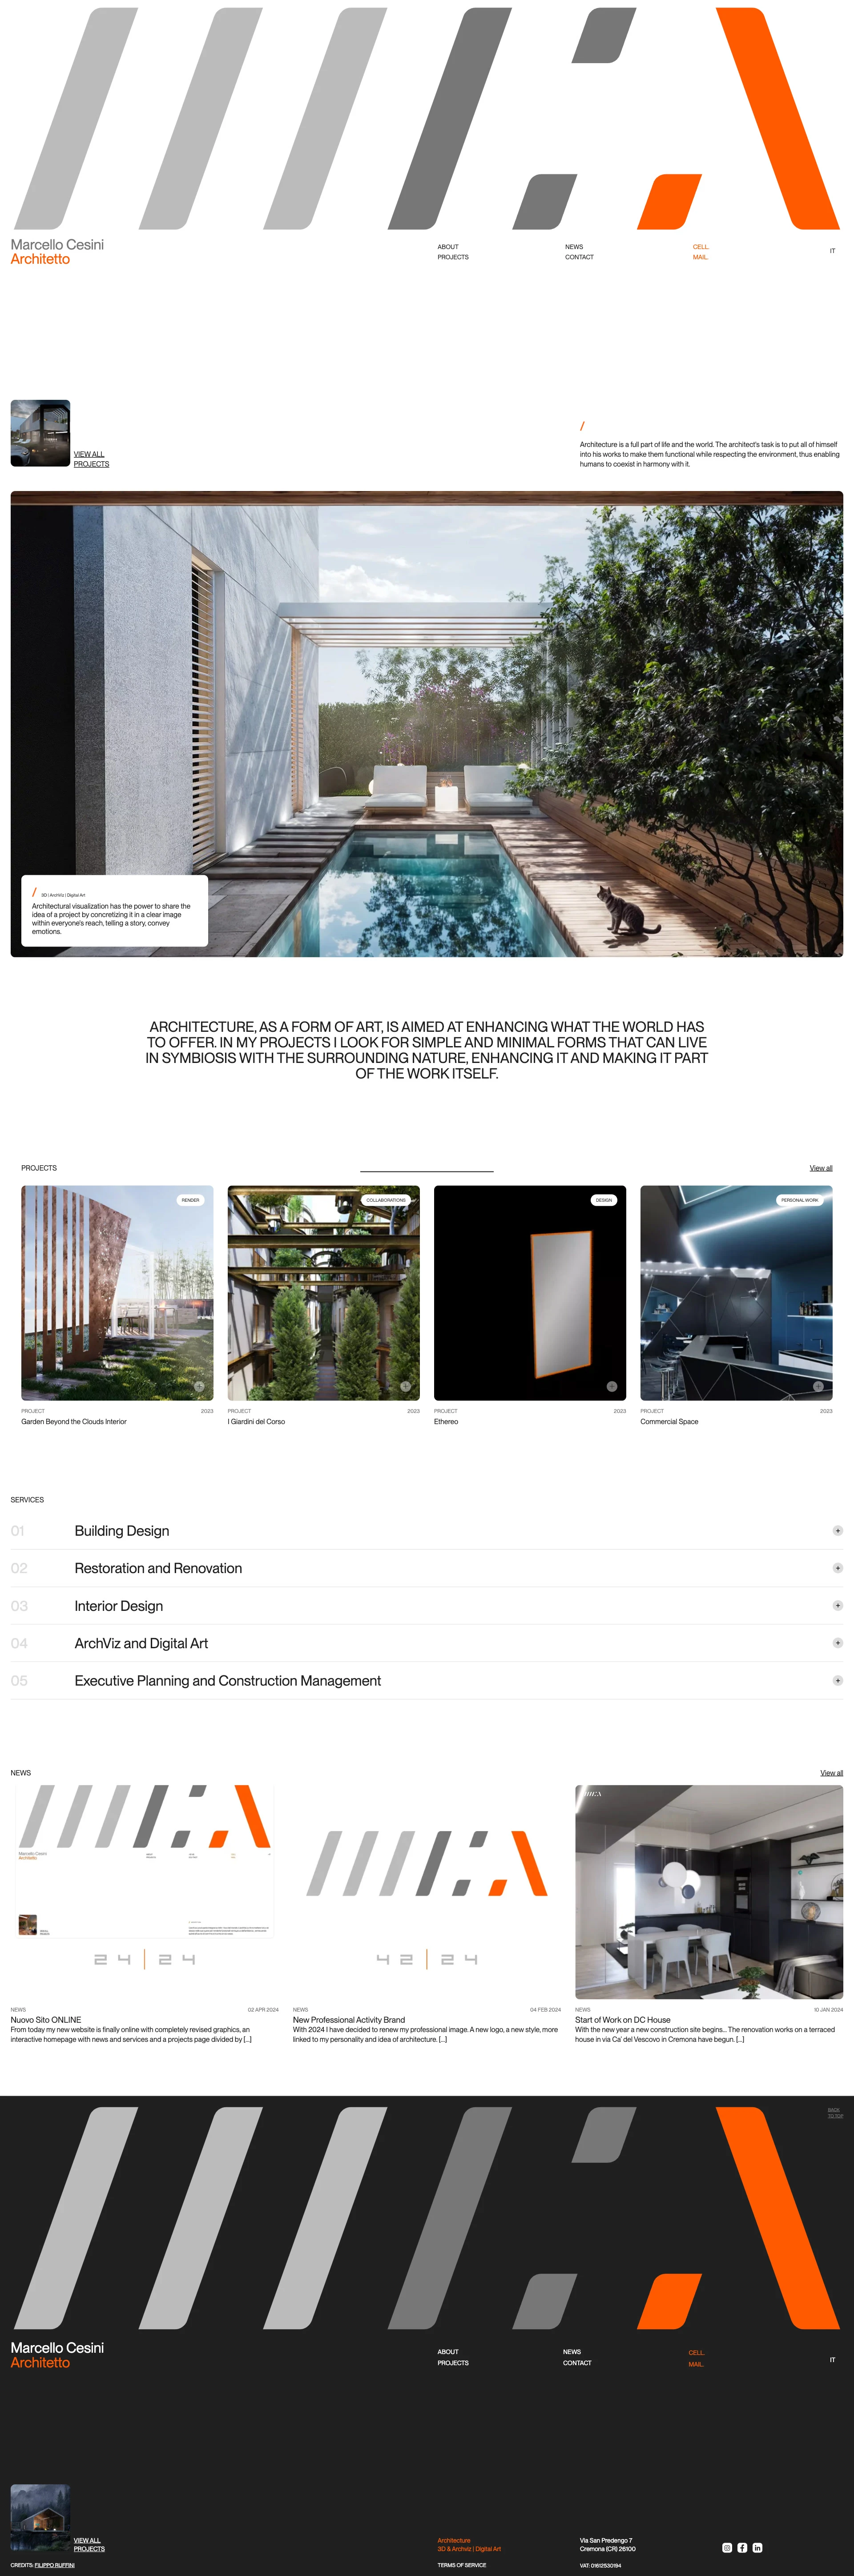 Marcello Cesini Landing Page Example: Architecture is a full part of life and the world. The architect's task is to put all of himself into his works to make them functional while respecting the environment, thus enabling humans to coexist in harmony with it.